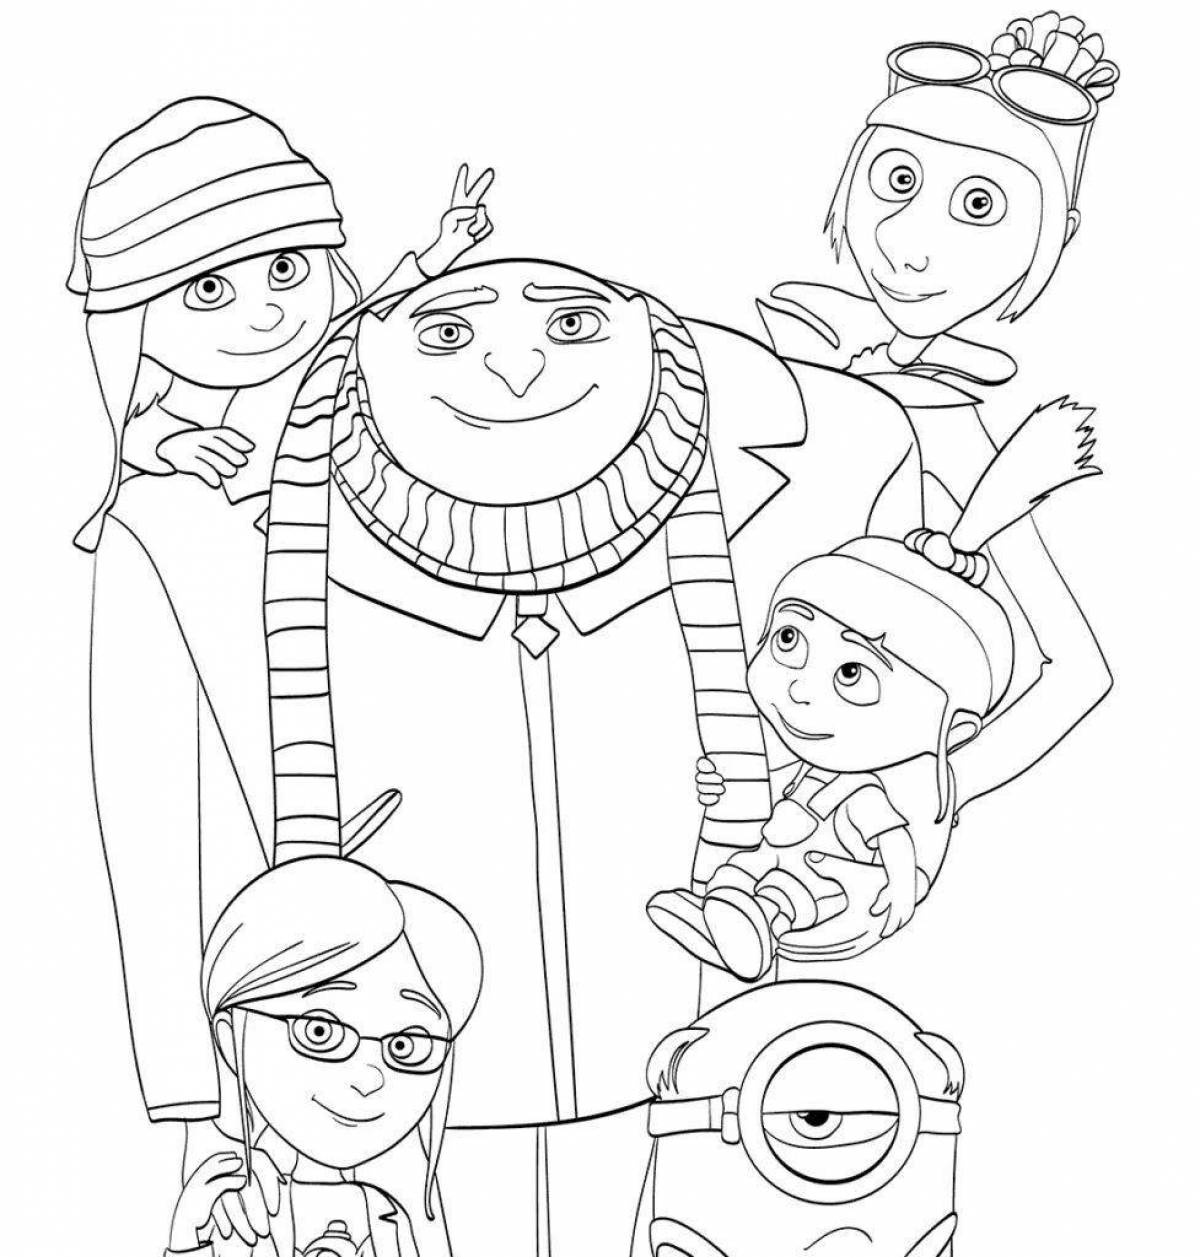 Coloring book glowing despicable me 2